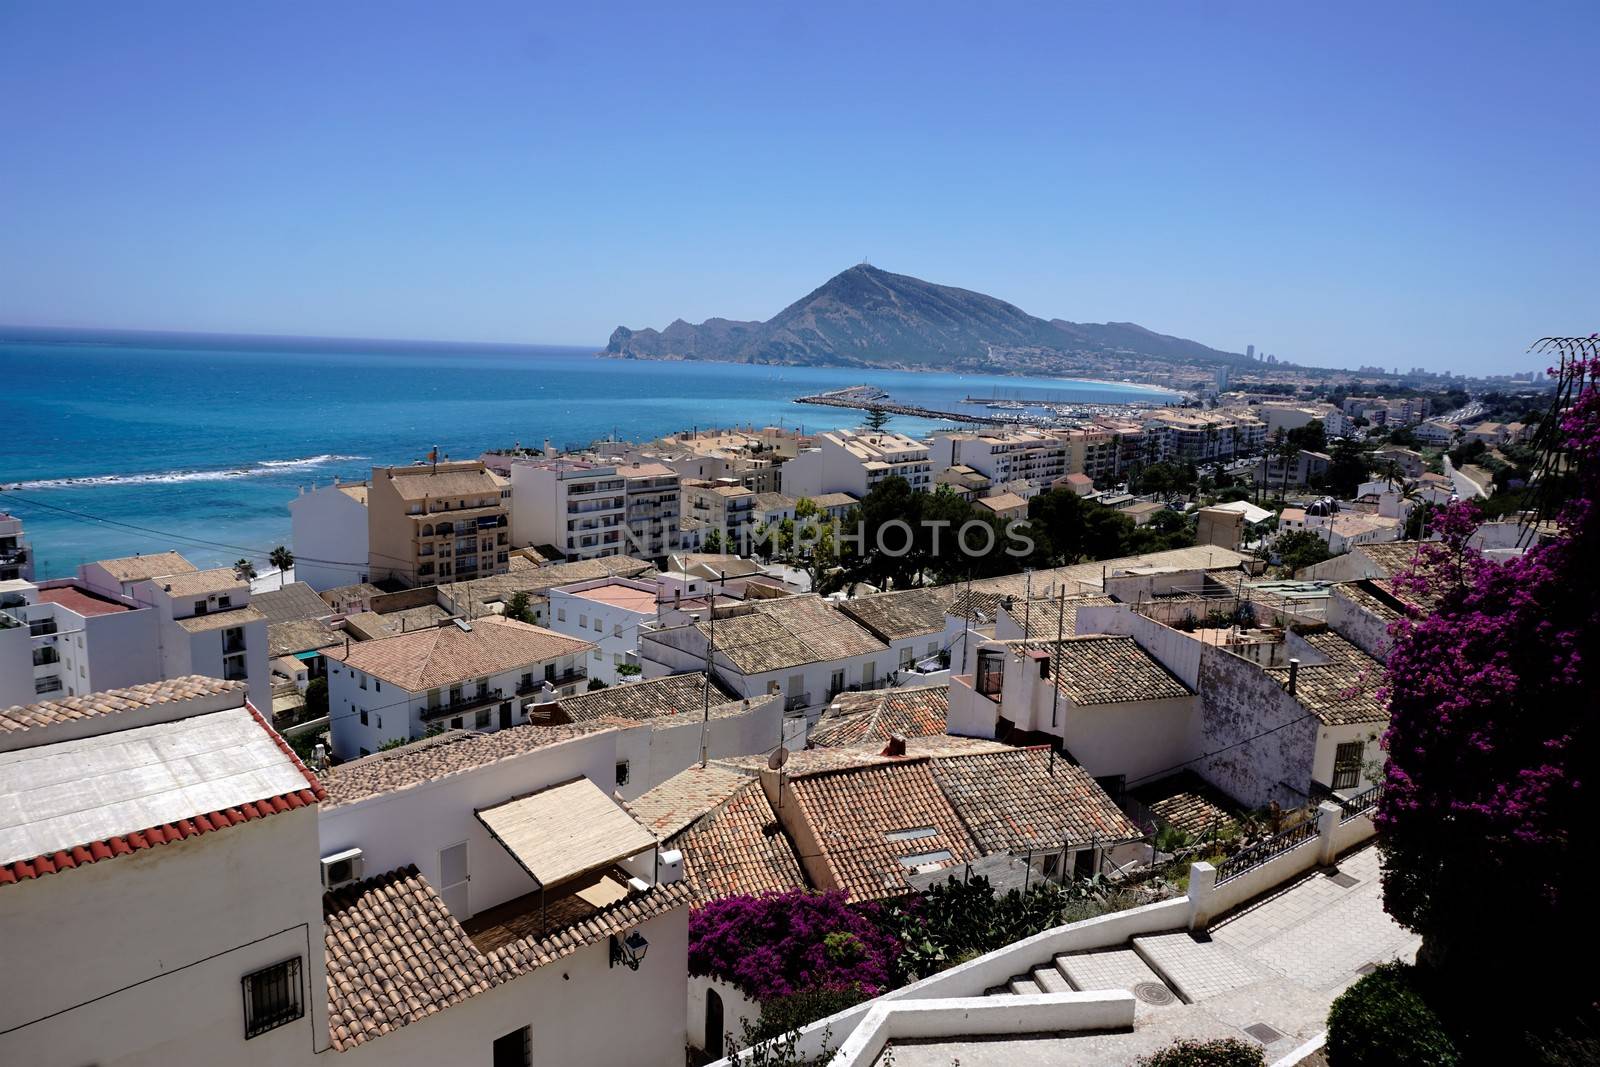 View from Altea over the sea to Benidorm, Spain